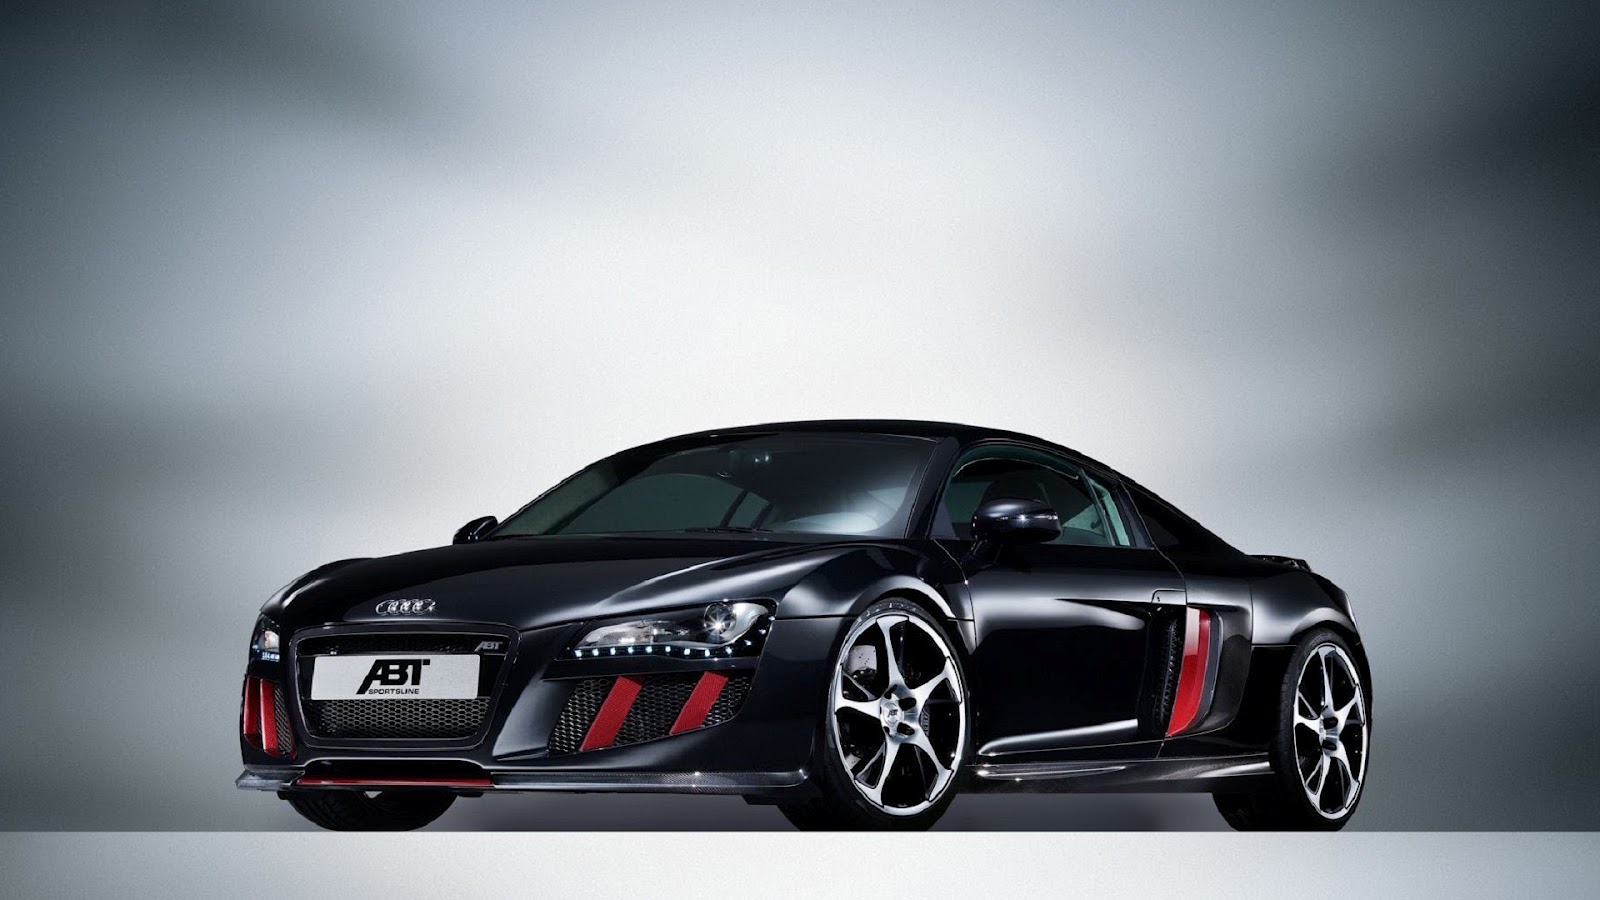 Most Expensive Audi R8 Price - HD Wallpaper 